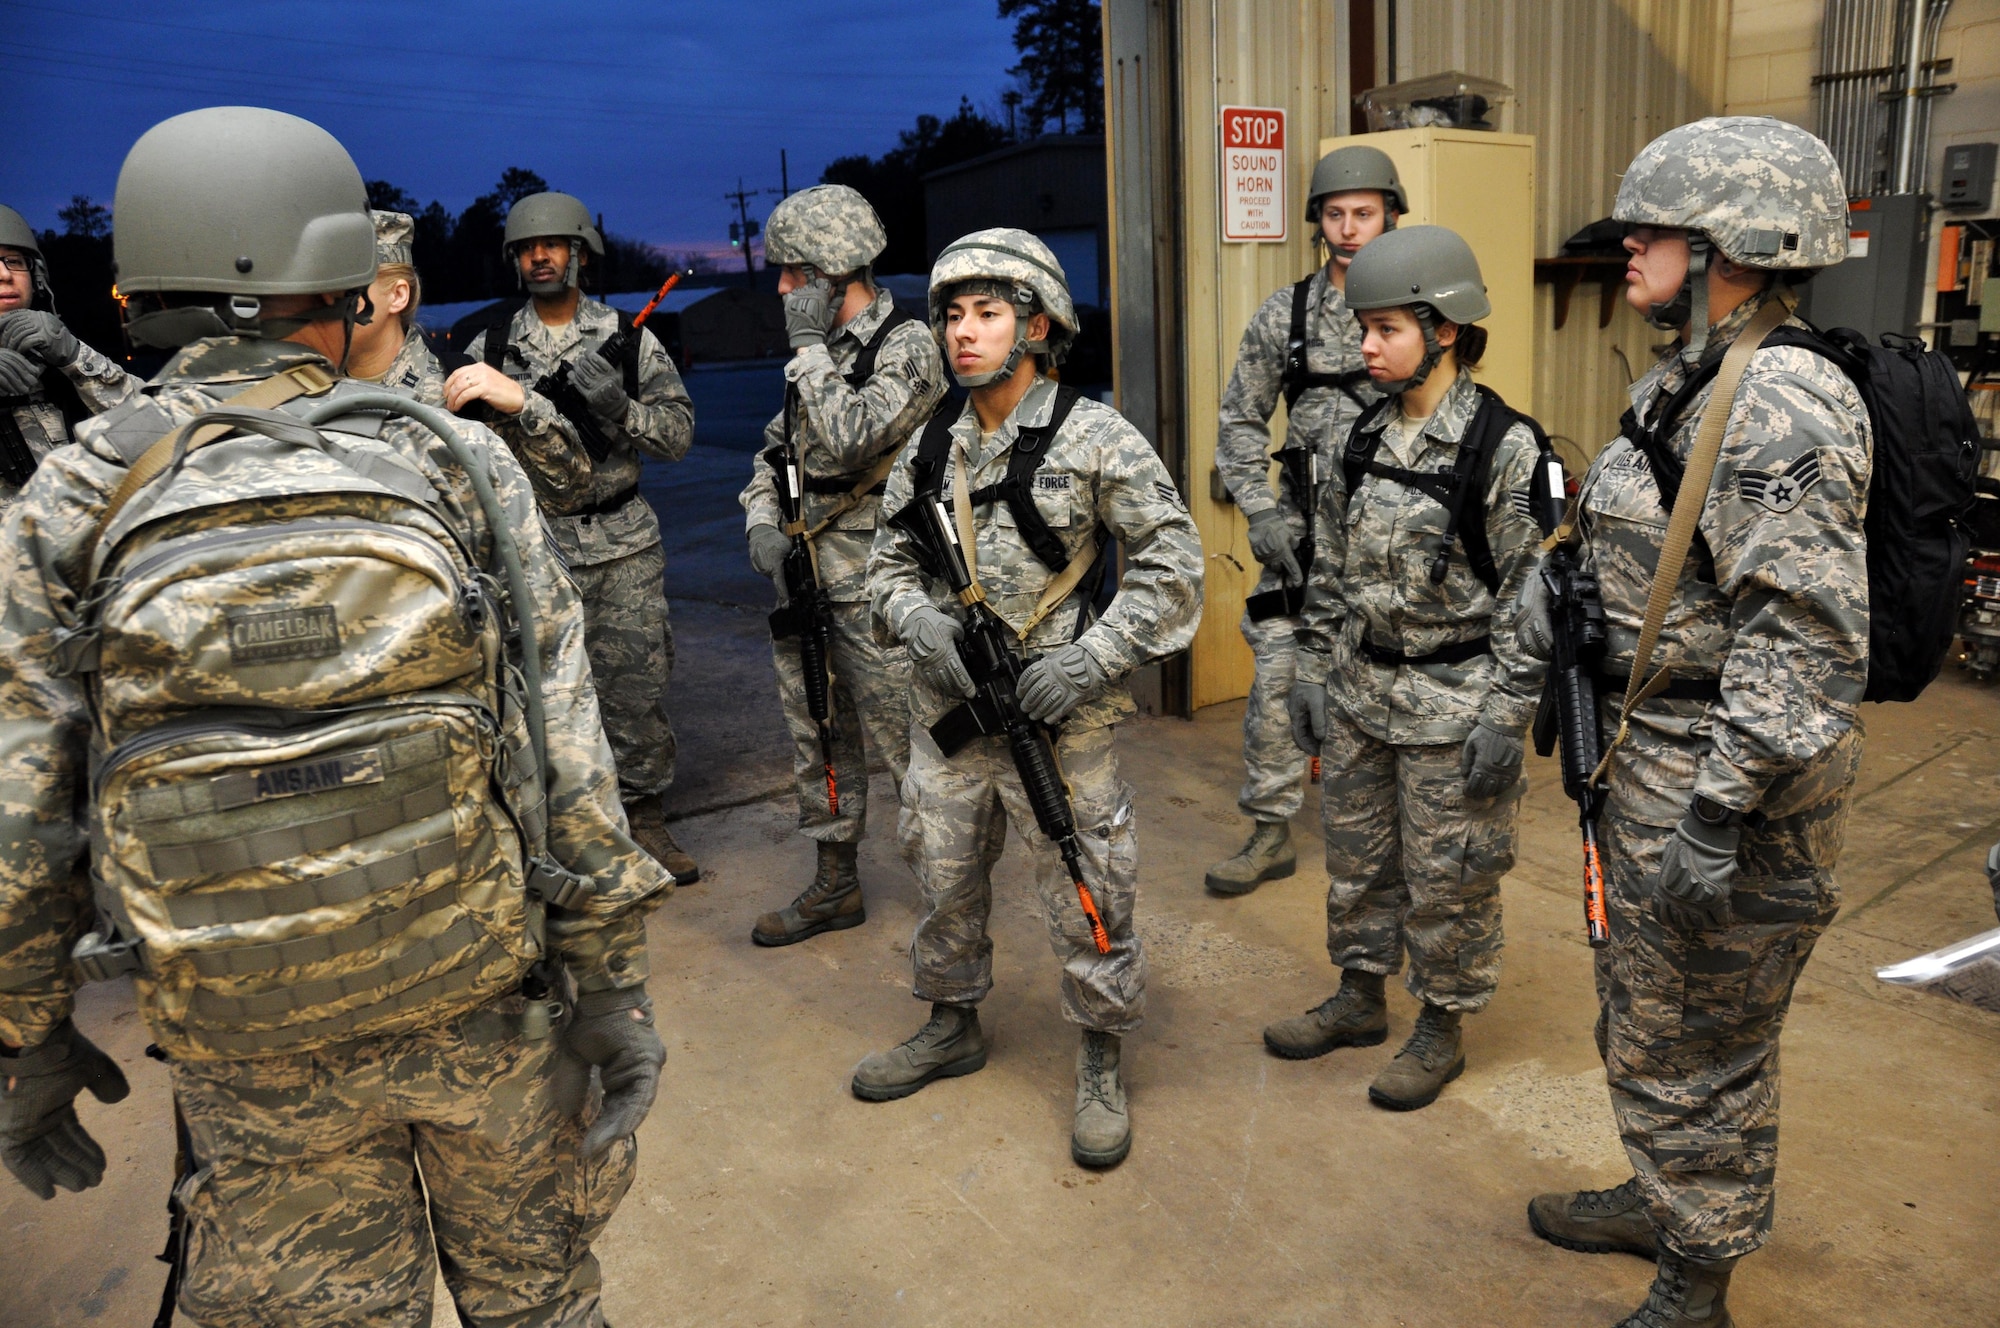 Airmen from the 911th Force Support Squadron, Pittsburgh, Pa., gear up for a patrol for OPERATION Everybody Panic as part of Force Support Silver Flag at Dobbins Air Reserve Base, Ga., March 10, 2015. Teams were tasked with engaging targets, self-aid buddy care, providing care under fire, identifying unexploded ordnances and improvised explosive devices, describing and providing the location of the UXOs and IEDs on a grid, low and high crawling, and transporting remains during this scenario. (U.S. Air Force photo/Senior Airman Daniel Phelps)